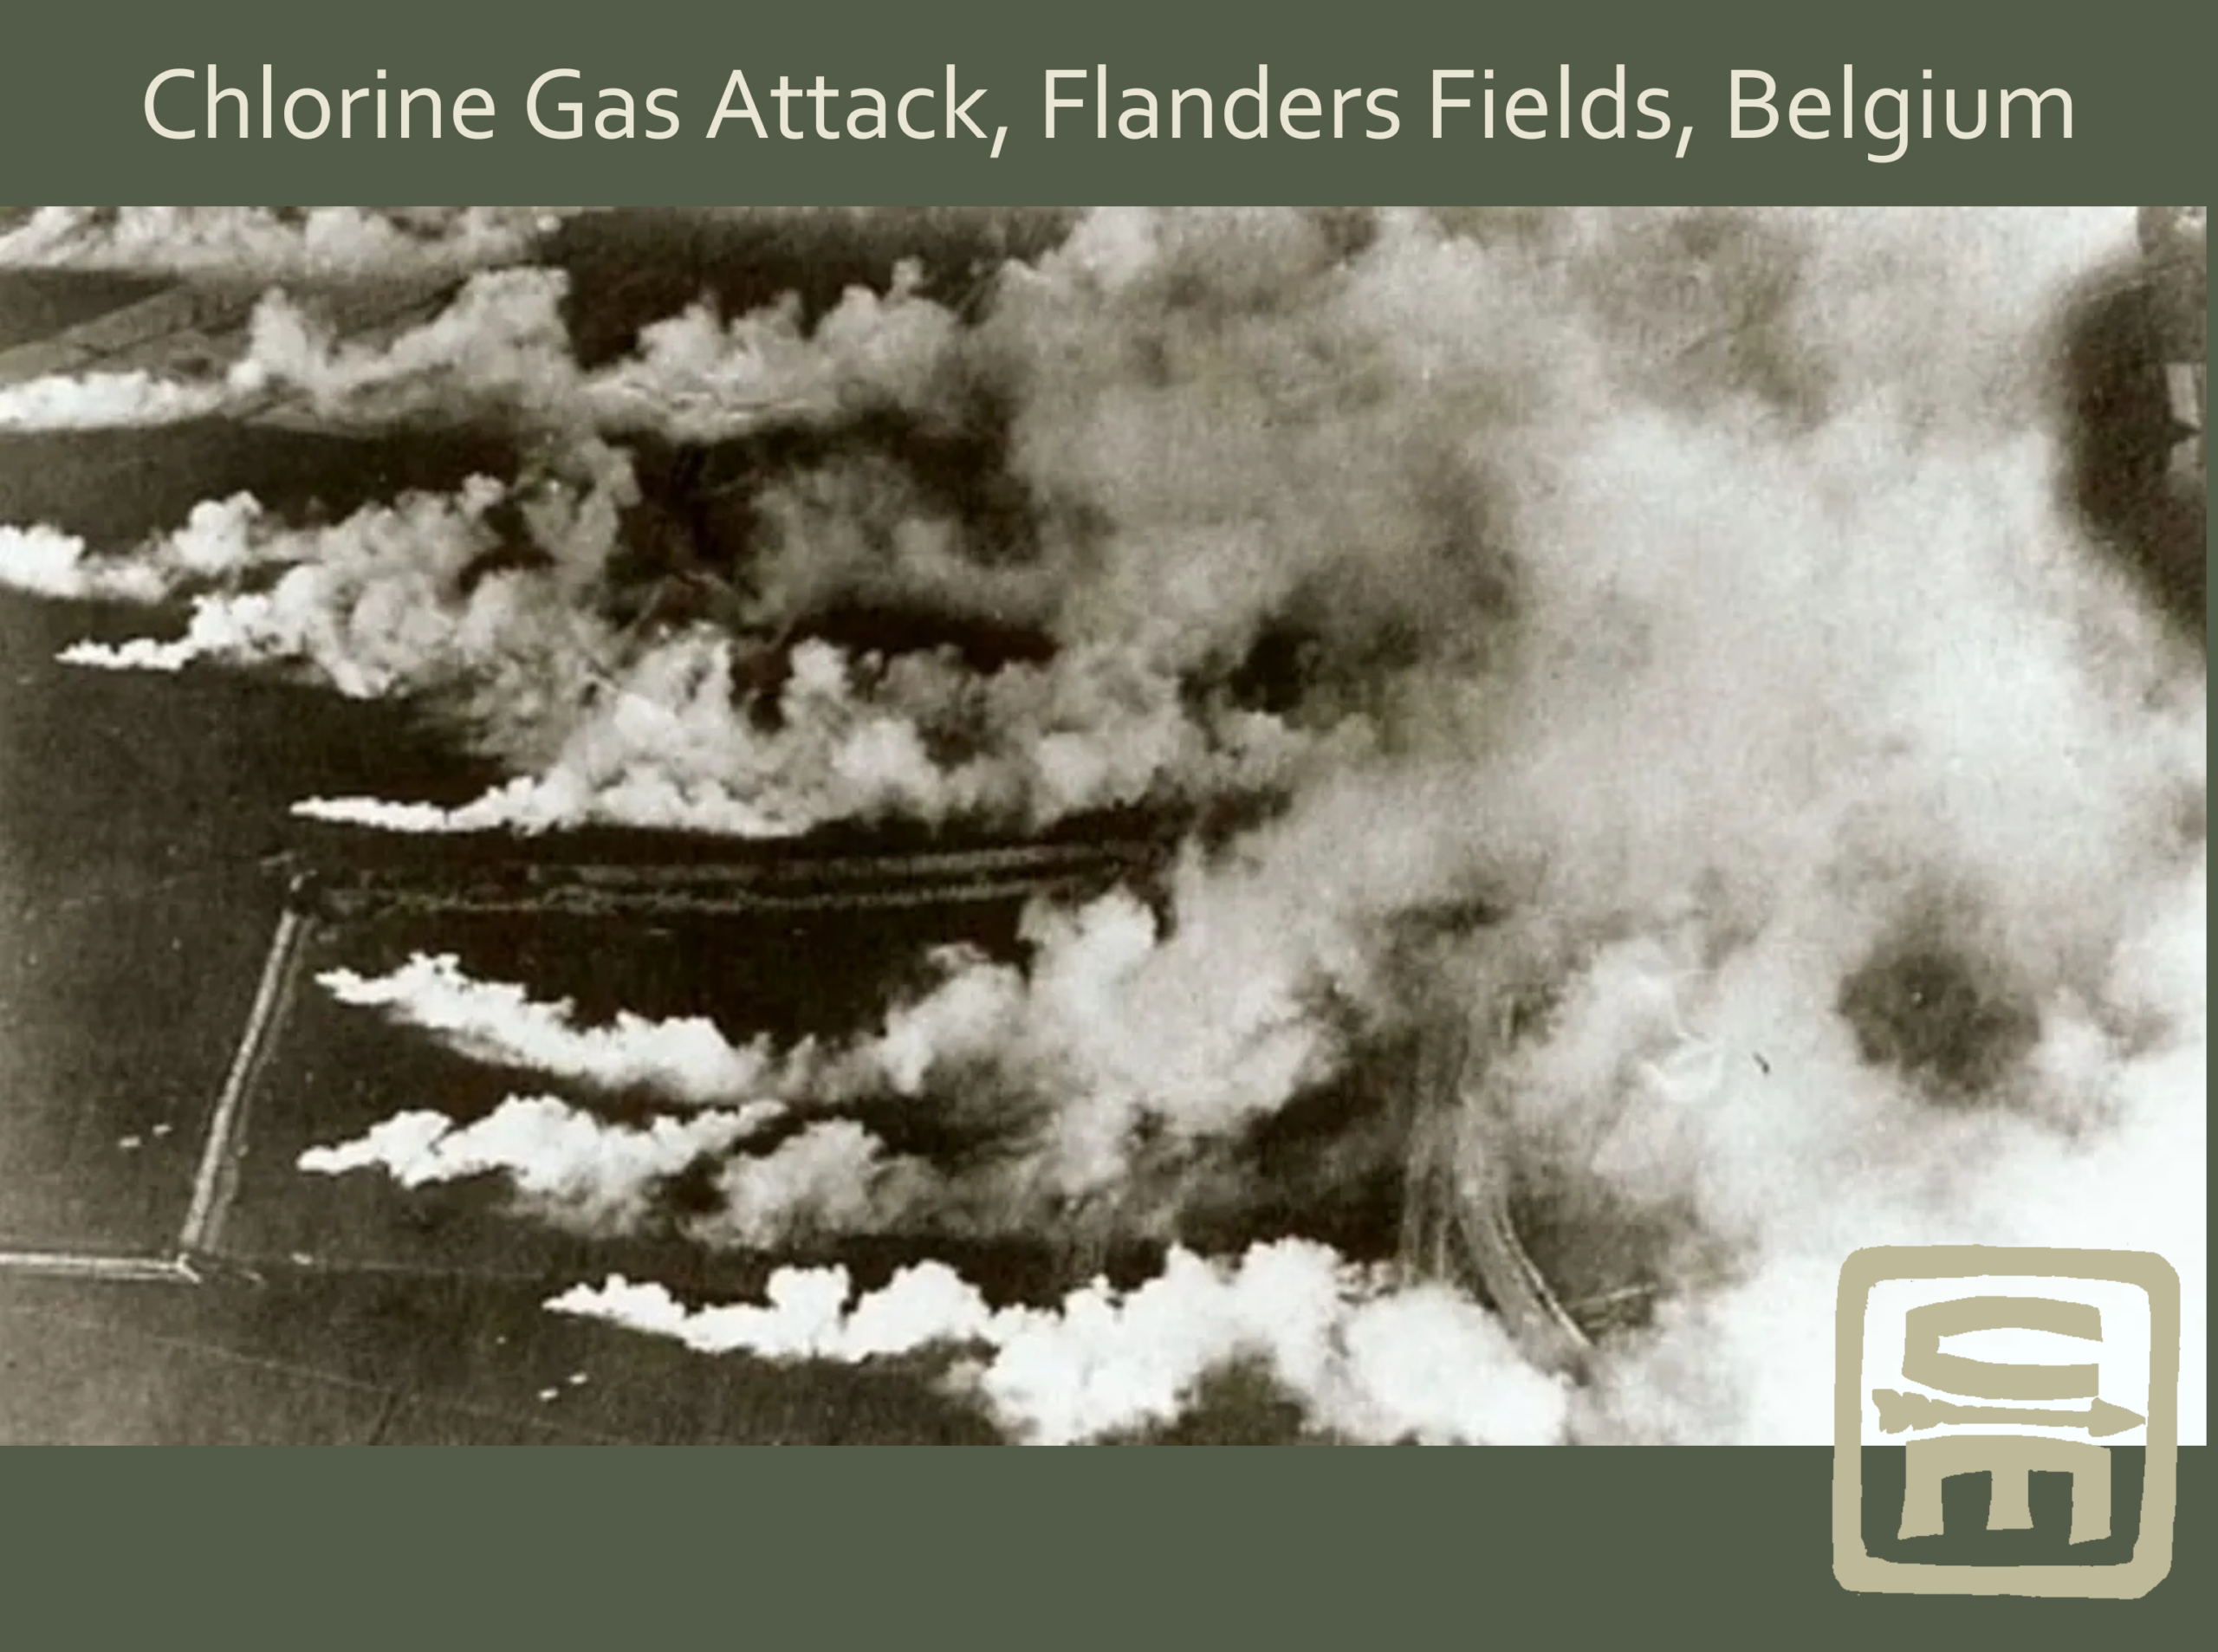 A historic photo showing a WWI Chlorine Gas Attack with plumes of gas wafting over the battlefield